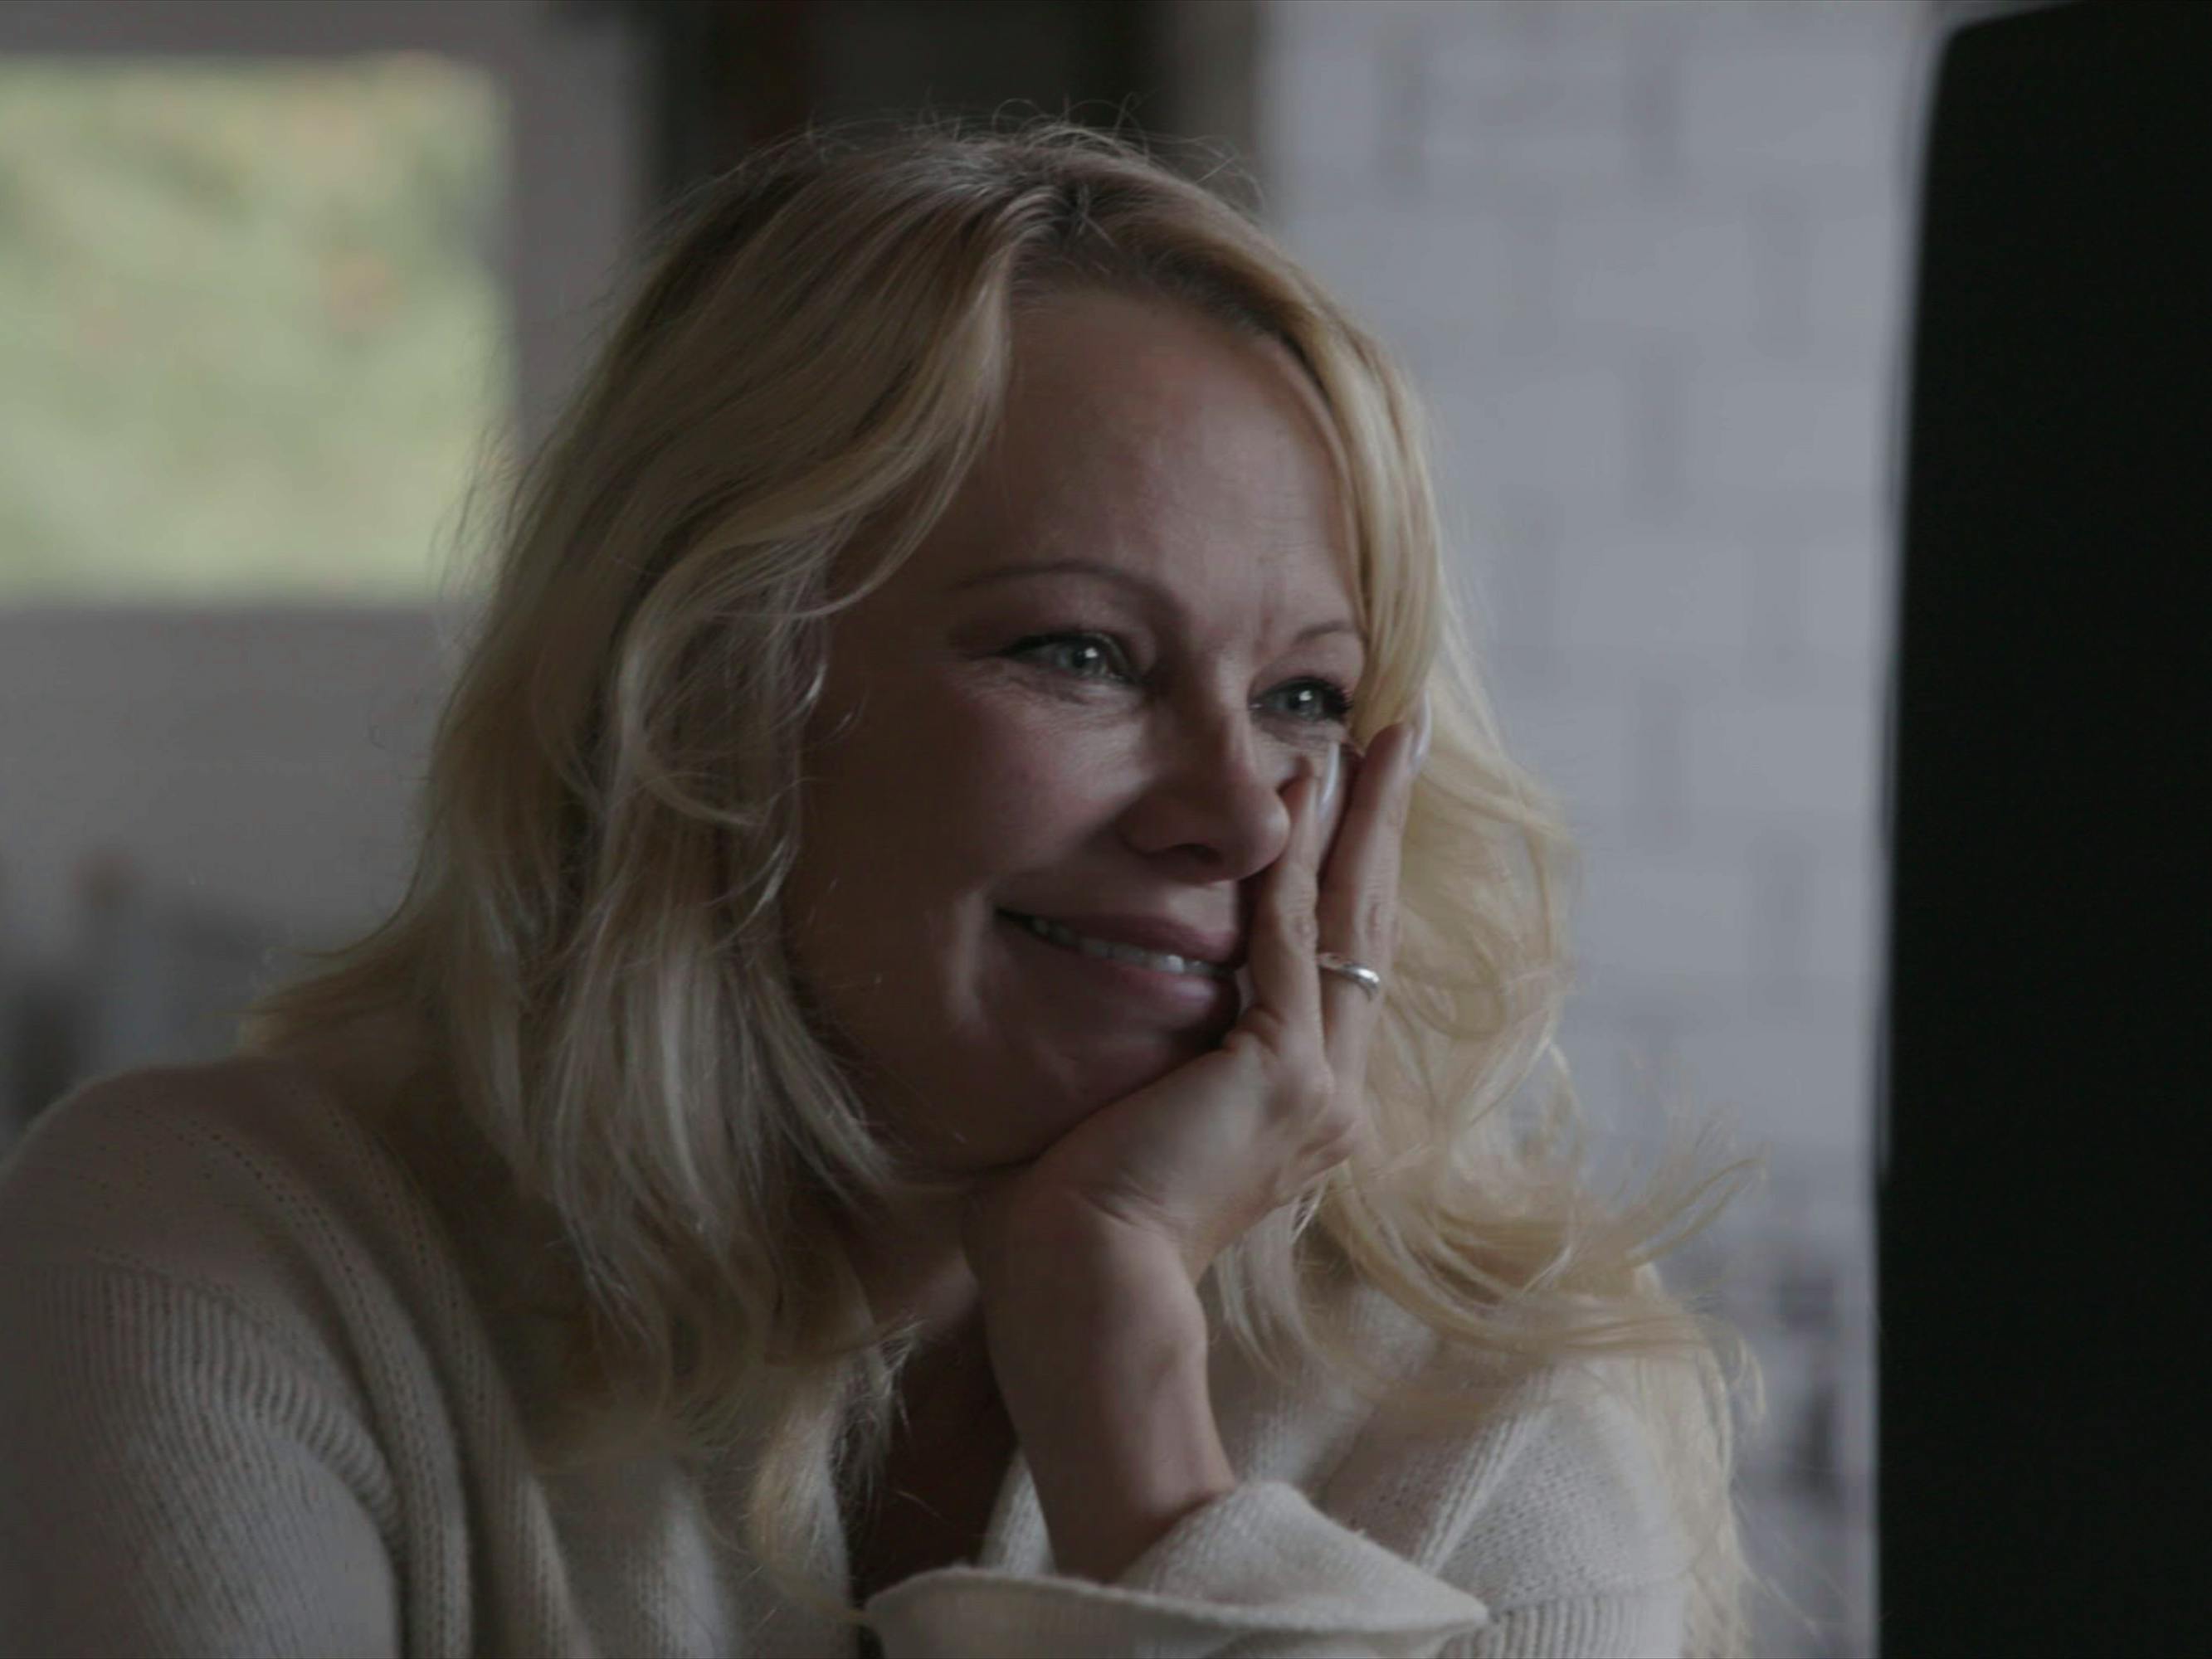 Pamela Anderson looks quietly beautiful in this cozy, morning-lit kitchen shot. She holds her hand to her face and smiles at something off-camera.